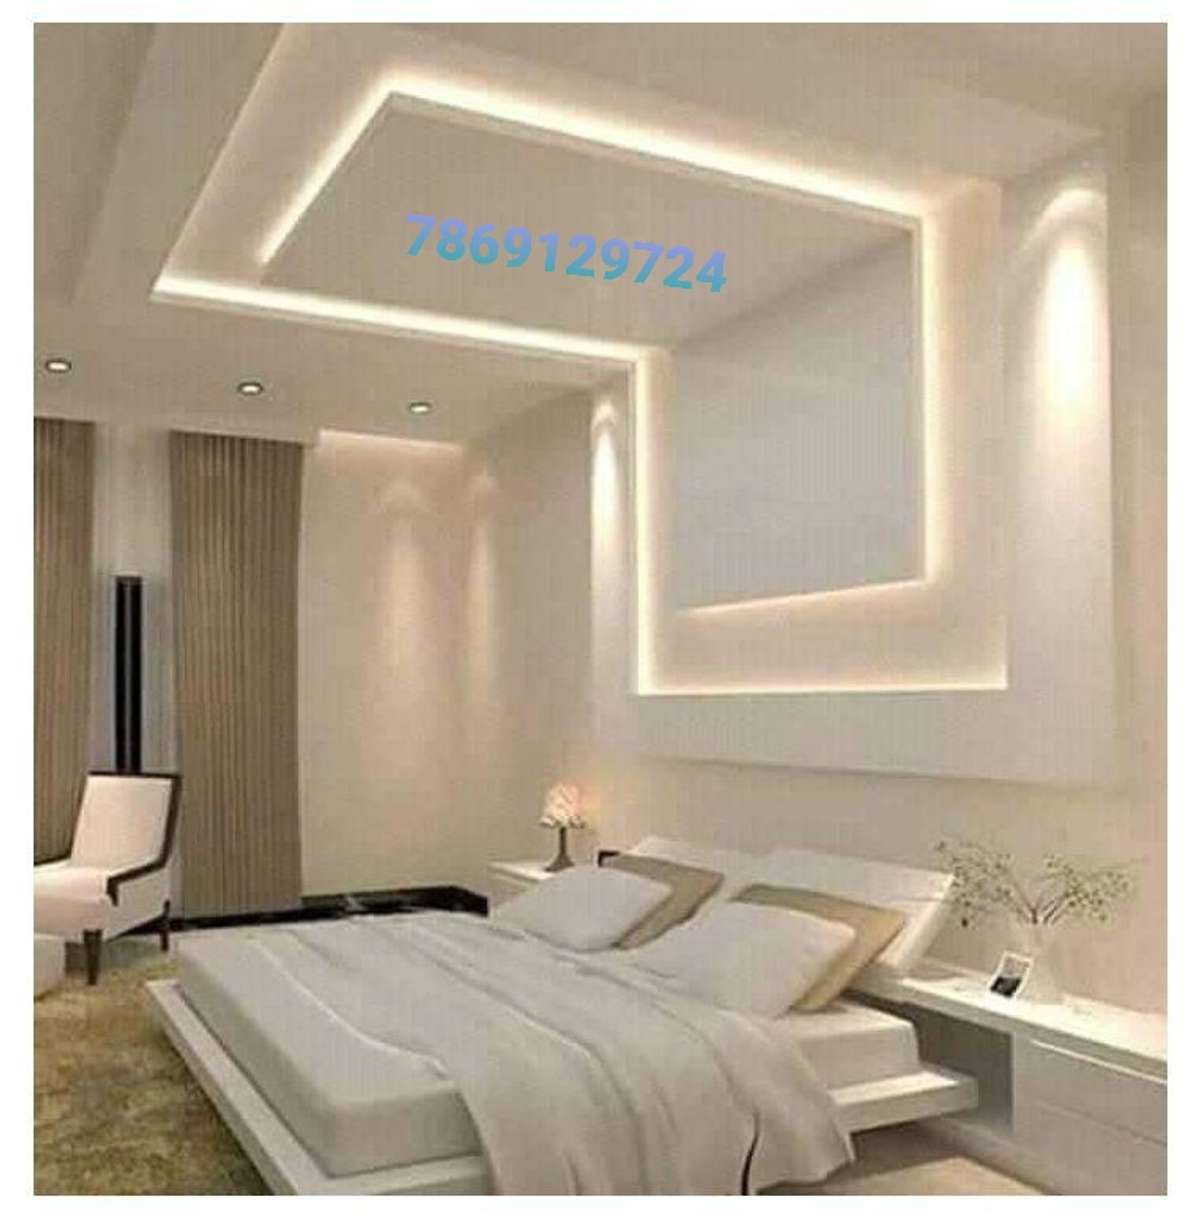 Ceiling, Furniture, Storage, Bedroom, Wall Designs by Building ...